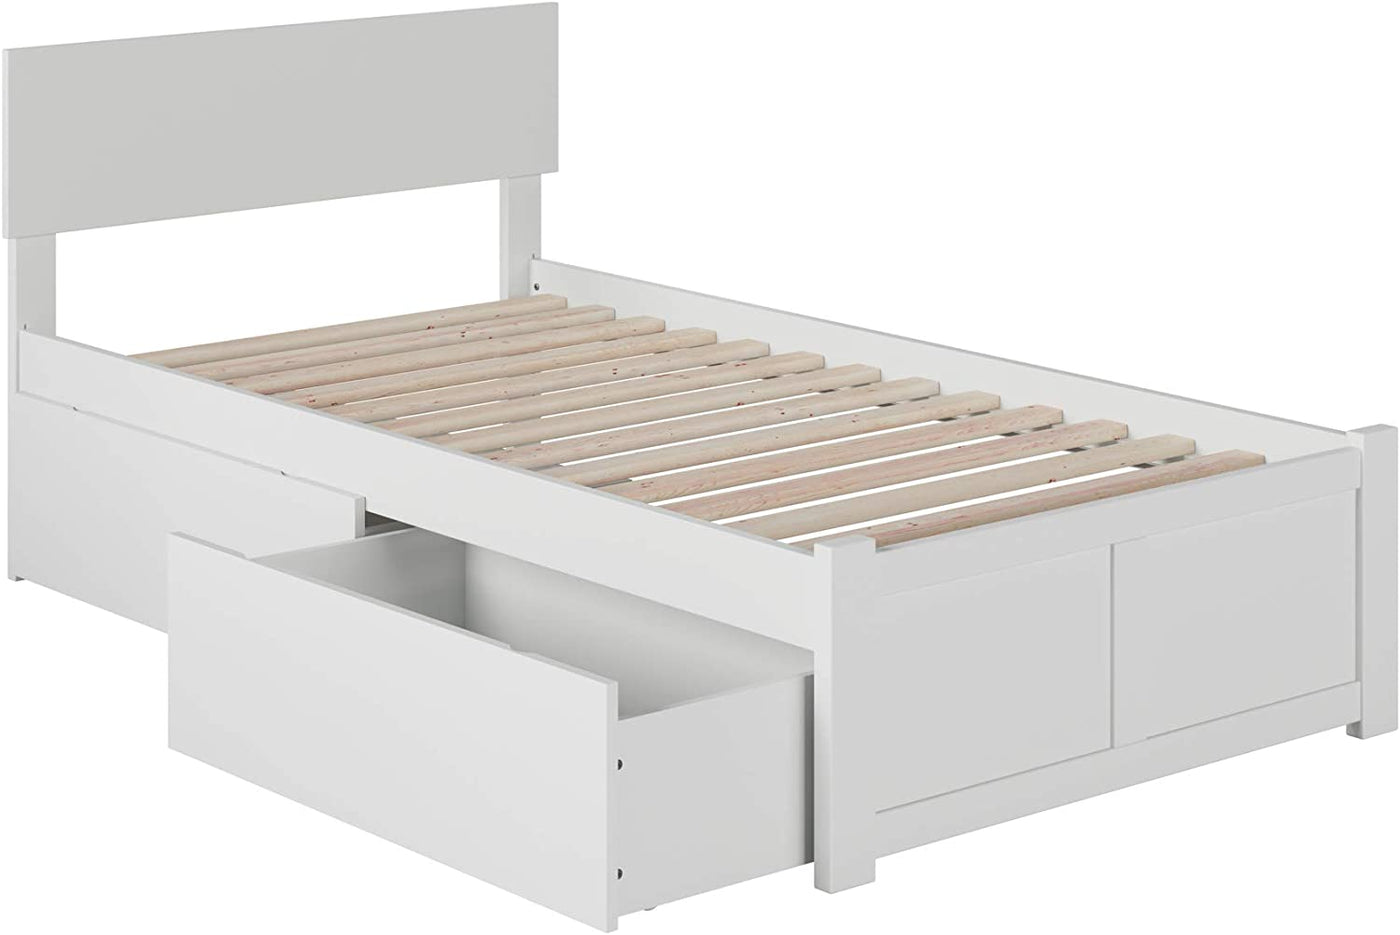 Atlantic Furniture Orlando Platform Trundle Bed with Turbo Charger, Twin - $215